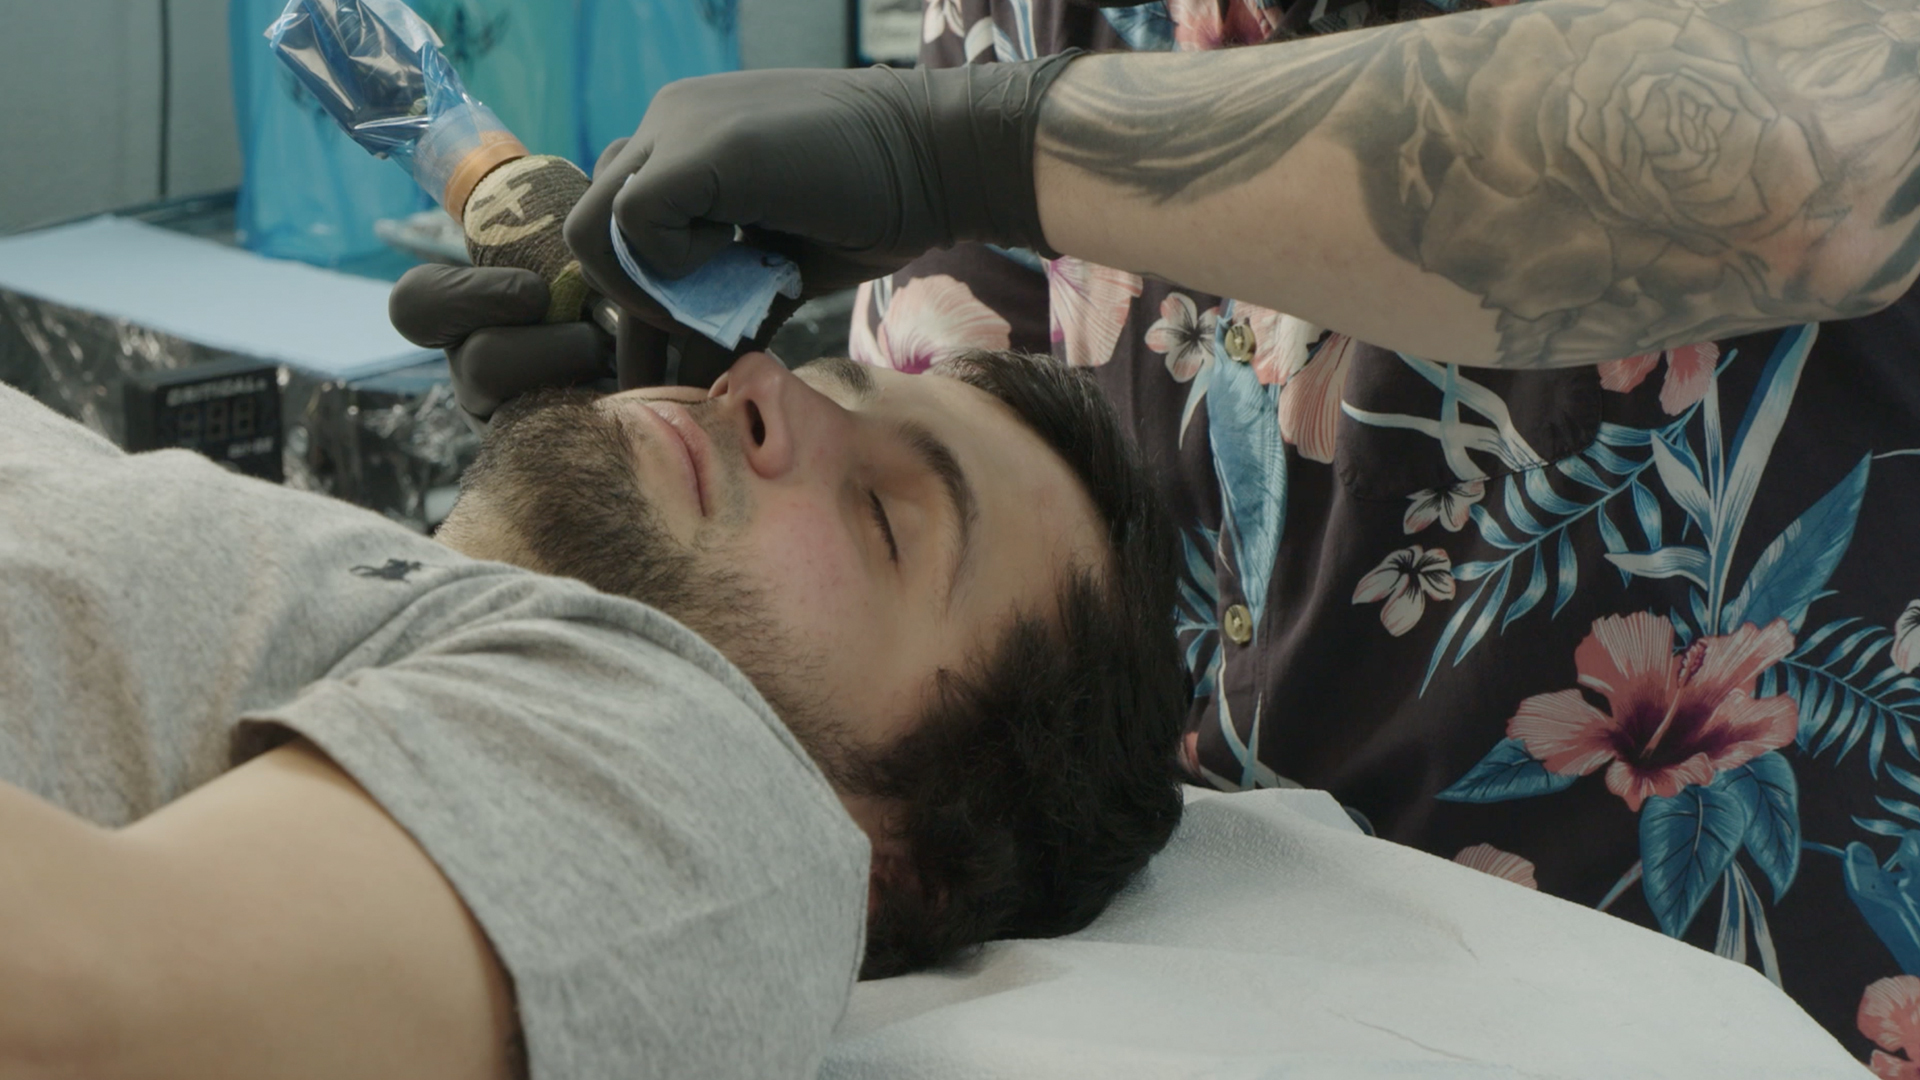 Watch Deleted Scene: Antoine Gets a Face Tattoo! | Love After Lockup Video Extras